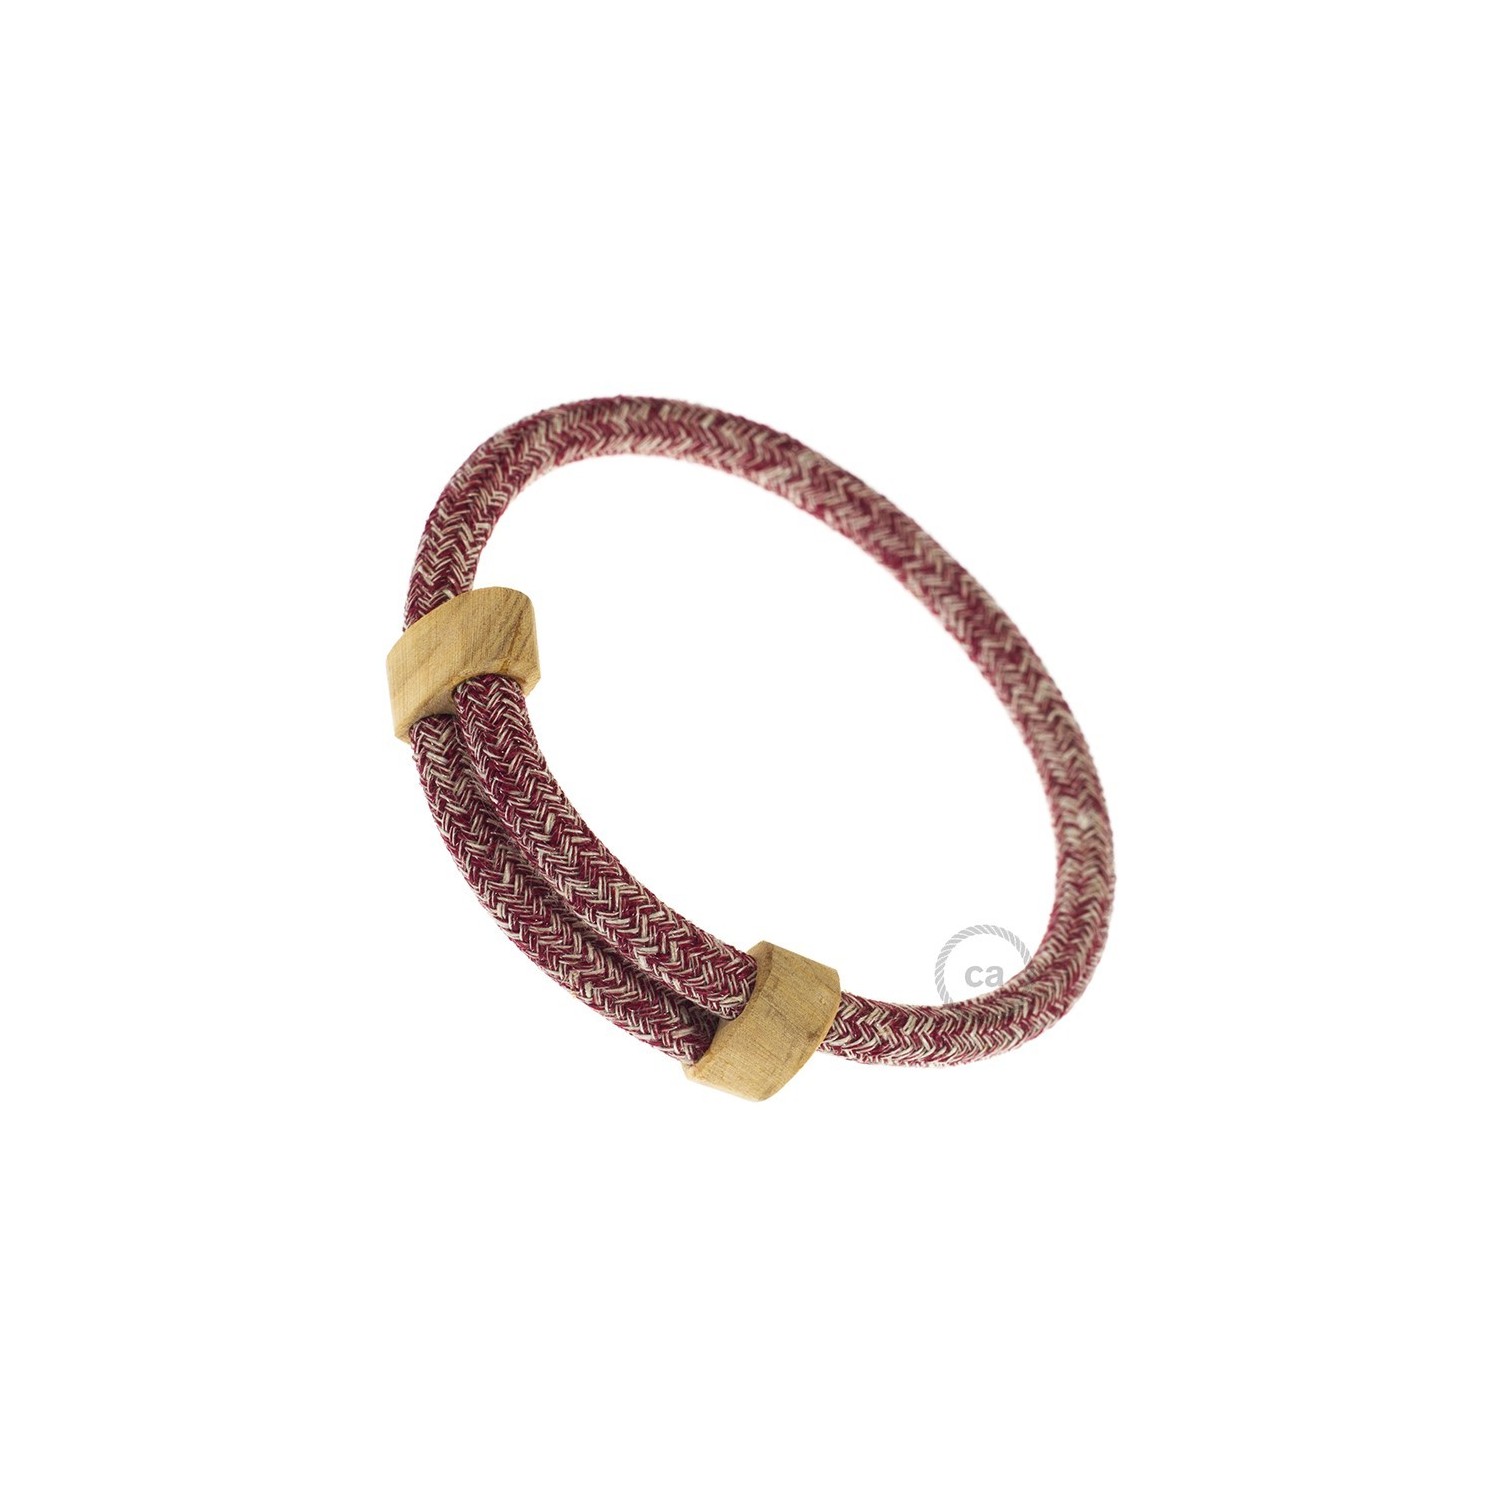 Creative-Bracelet in Burgundy Tweed Cotton, Natural Linen and finishing Glitter RS83. Wood sliding fastening. Made in Italy.